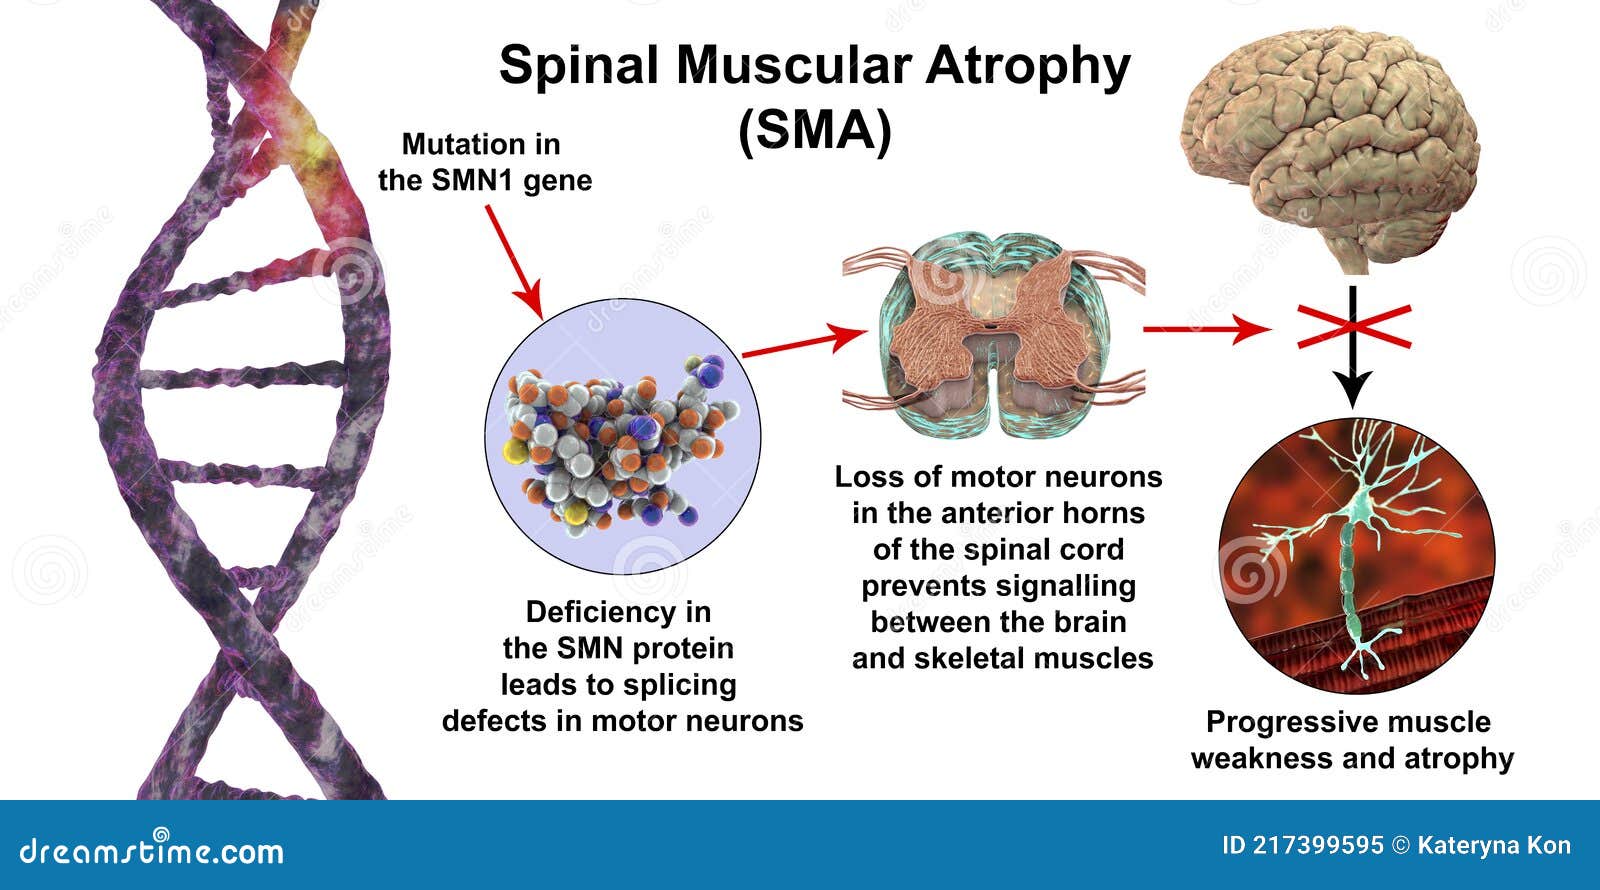 spinal muscular atrophy, sma, a genetic neuromuscular disorder with progressive muscle wasting